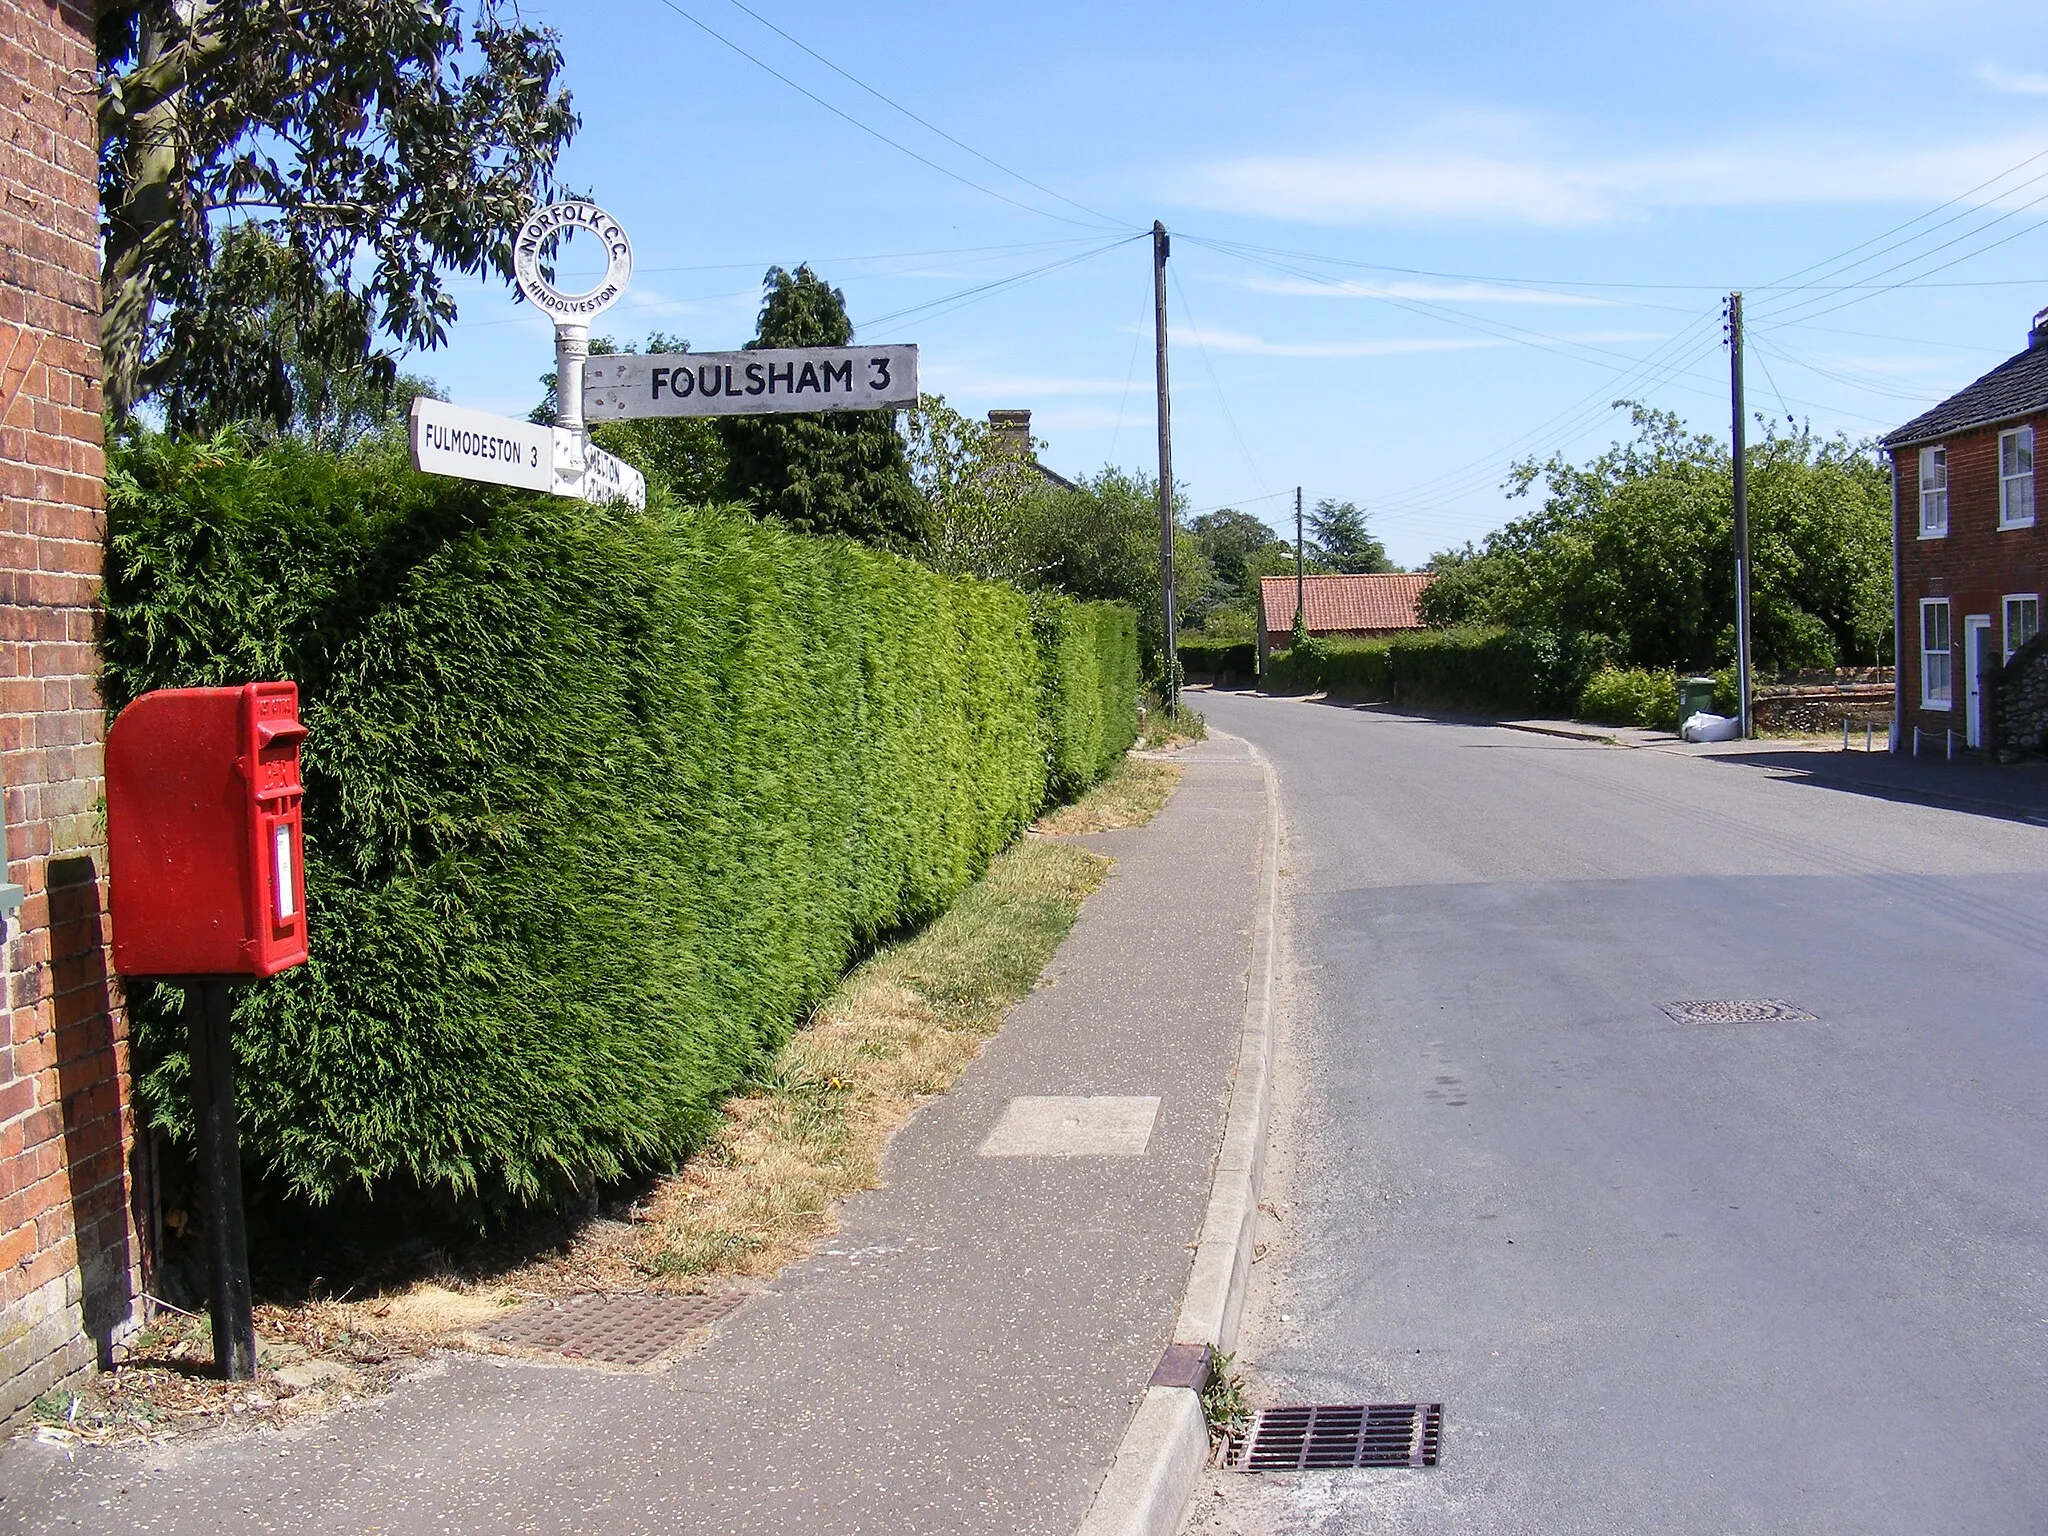 Photo showing: The Street & The Street Postbox